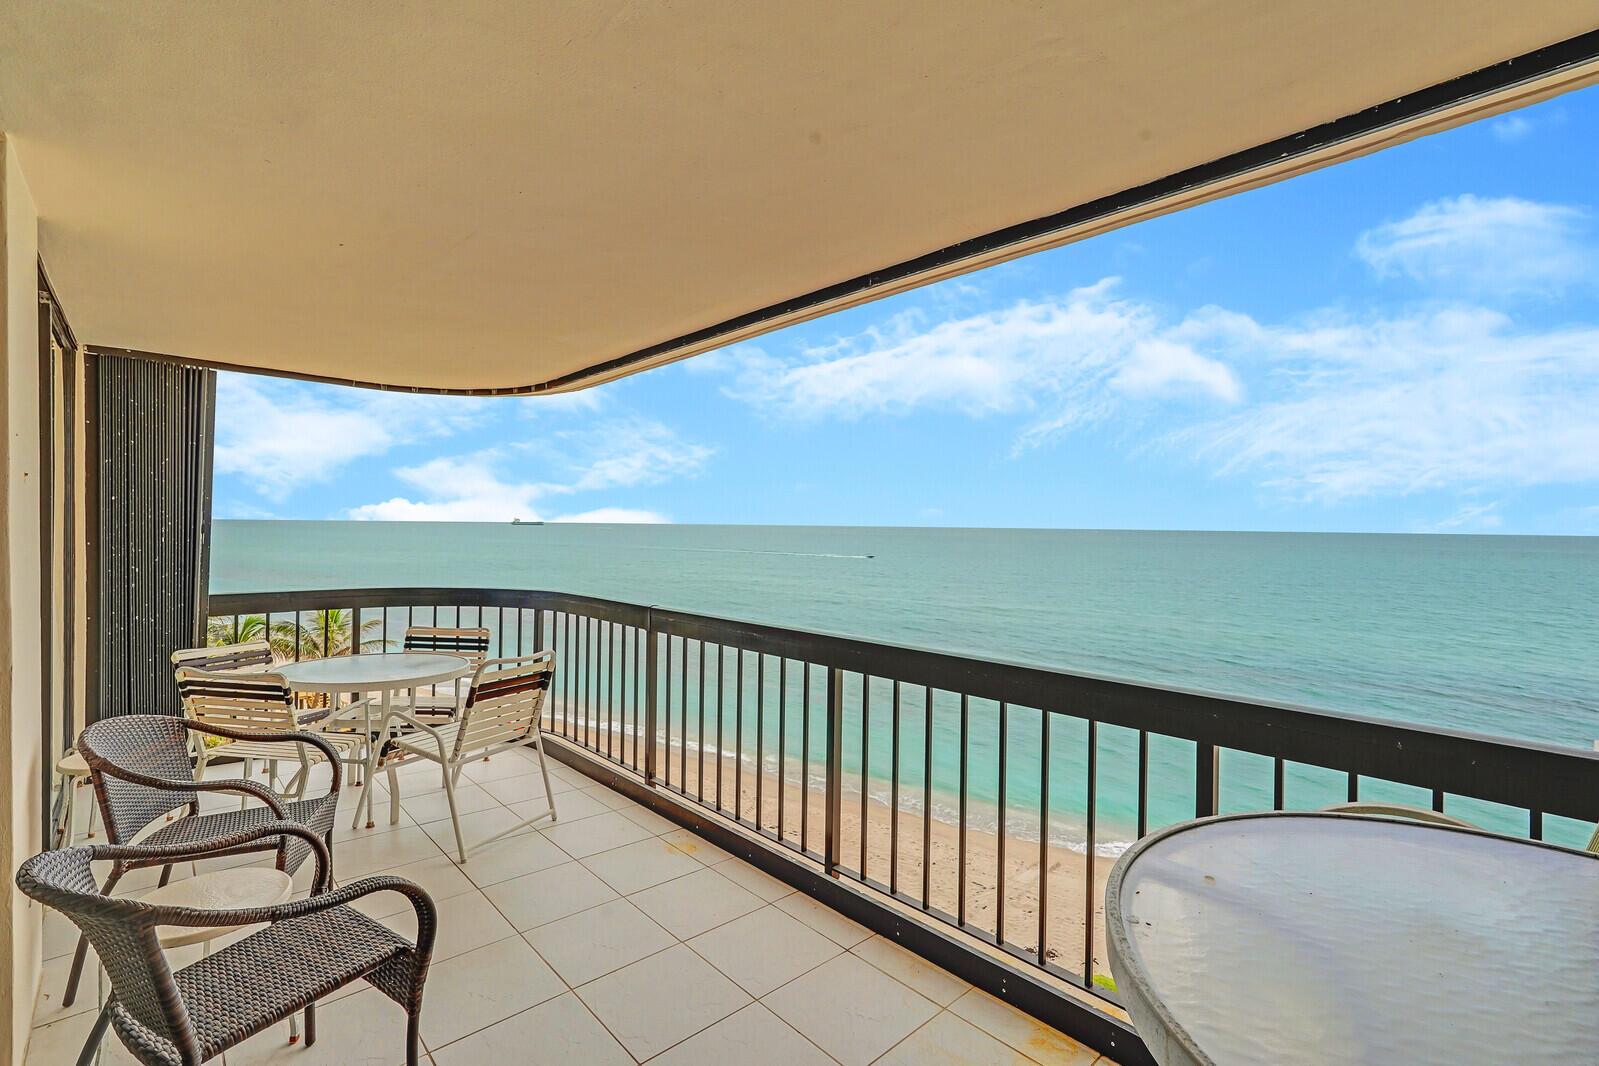 Enjoy Stunning Views From This Direct Oceanfront Corner Unit! Many Features Include 24/7 Manned Gate, 2024 AC System, New Hot Water Heater,Garage Parking, Covered Balcony, New Roof, Accordion Shutters, Large Master Suite & Bathroom. Eastpointe Tower 1 Offers Heated Pool, Spa, Concierge, Gym, Clubhouse, Billiards, Library, Private Beach Access & BBQ Area. Located On One of South Florida's Most Desired Beaches & In The Heart of ALL Singer Island Has to Offer - Restaurants, Shopping, Parasailing, Jet Ski Rentals, Ferry to Peanut Island, Sailfish Marina, Snorkel Blue Heron Bridge and So Much More. Only 2o min to Palm Beach Island & Palm Beach International Airport.